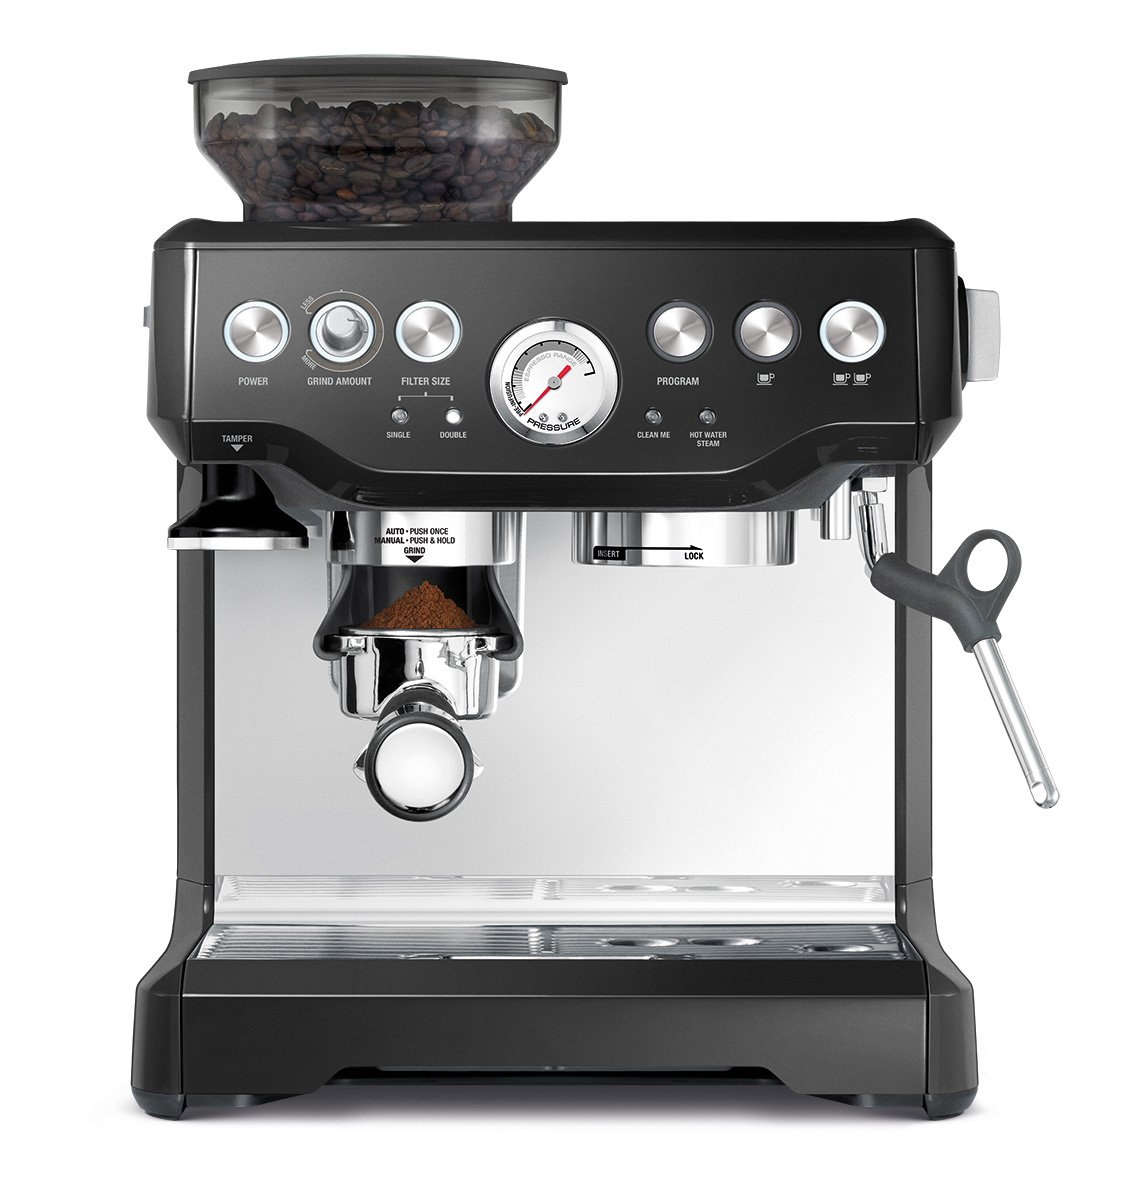 🎉Today's Only $45 Deal - Espresso Machines.